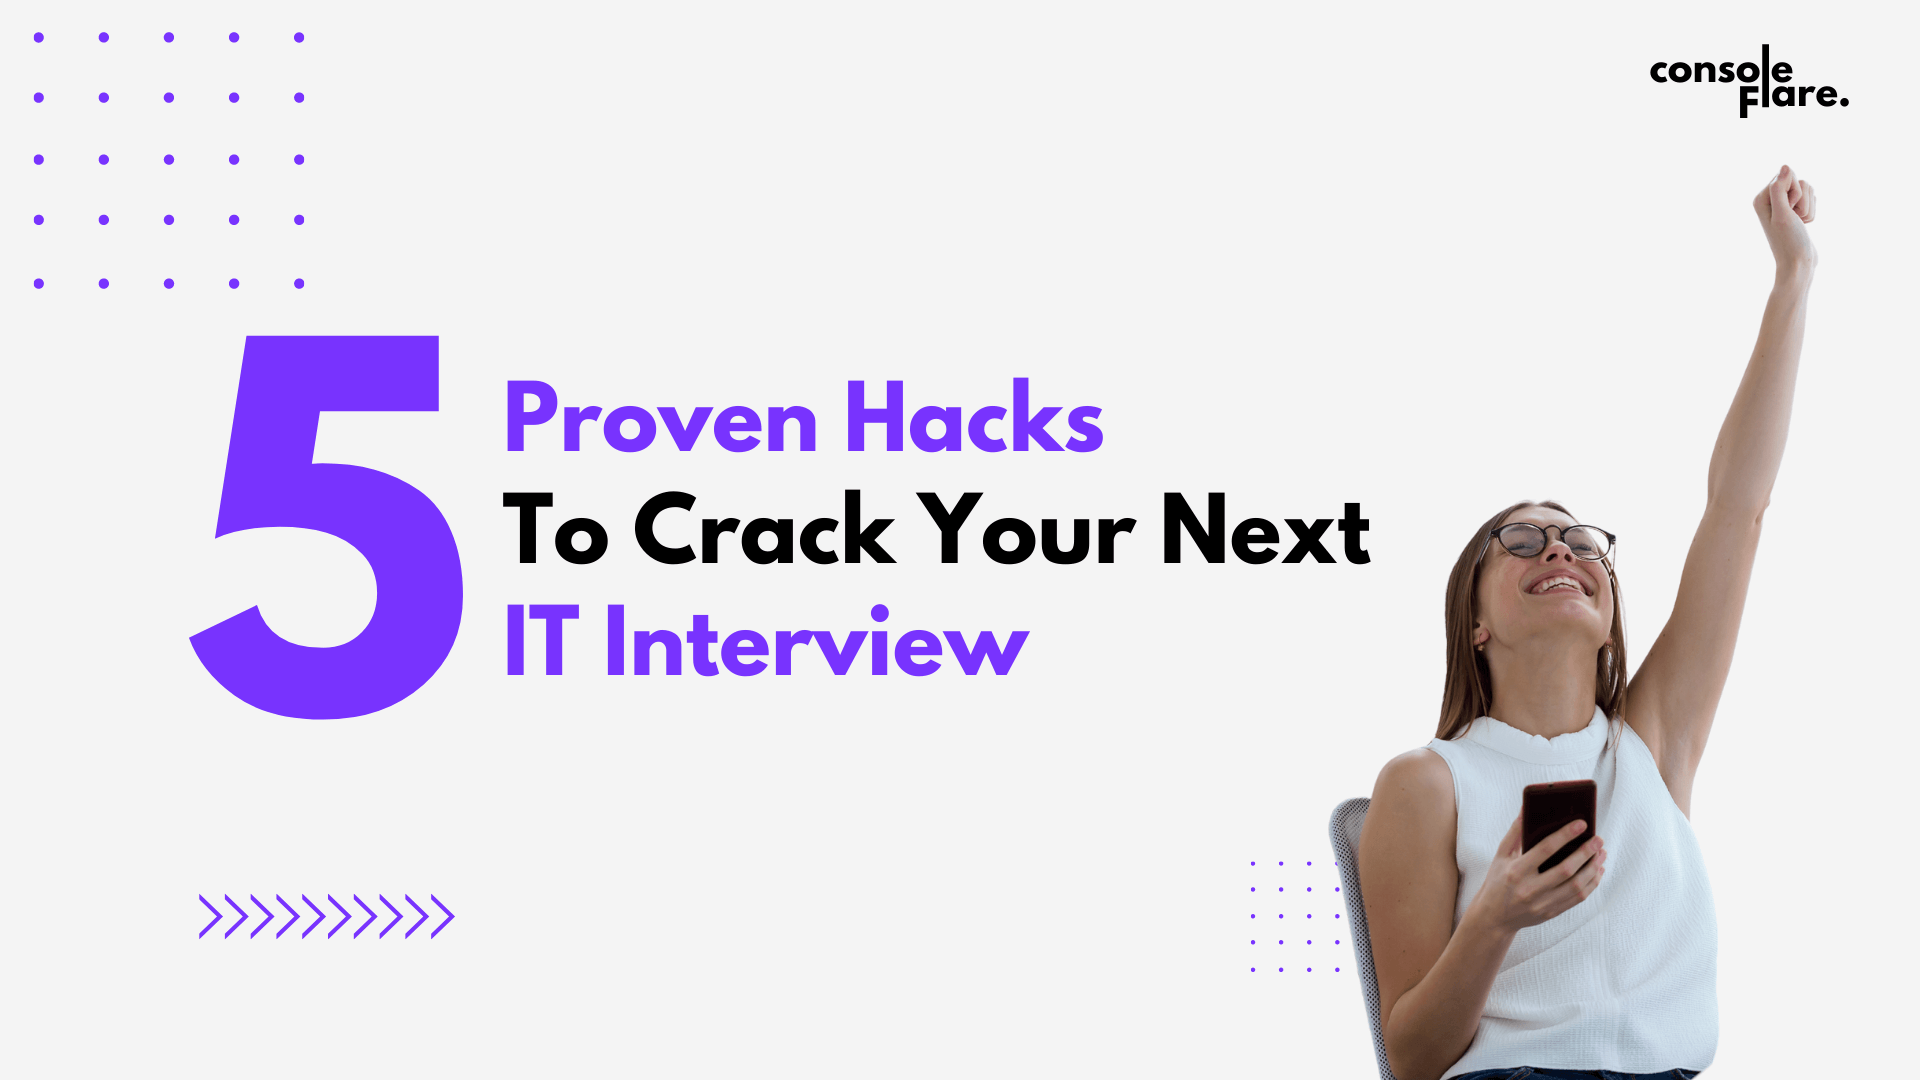 5 Proven Hacks to Crack an IT Interview